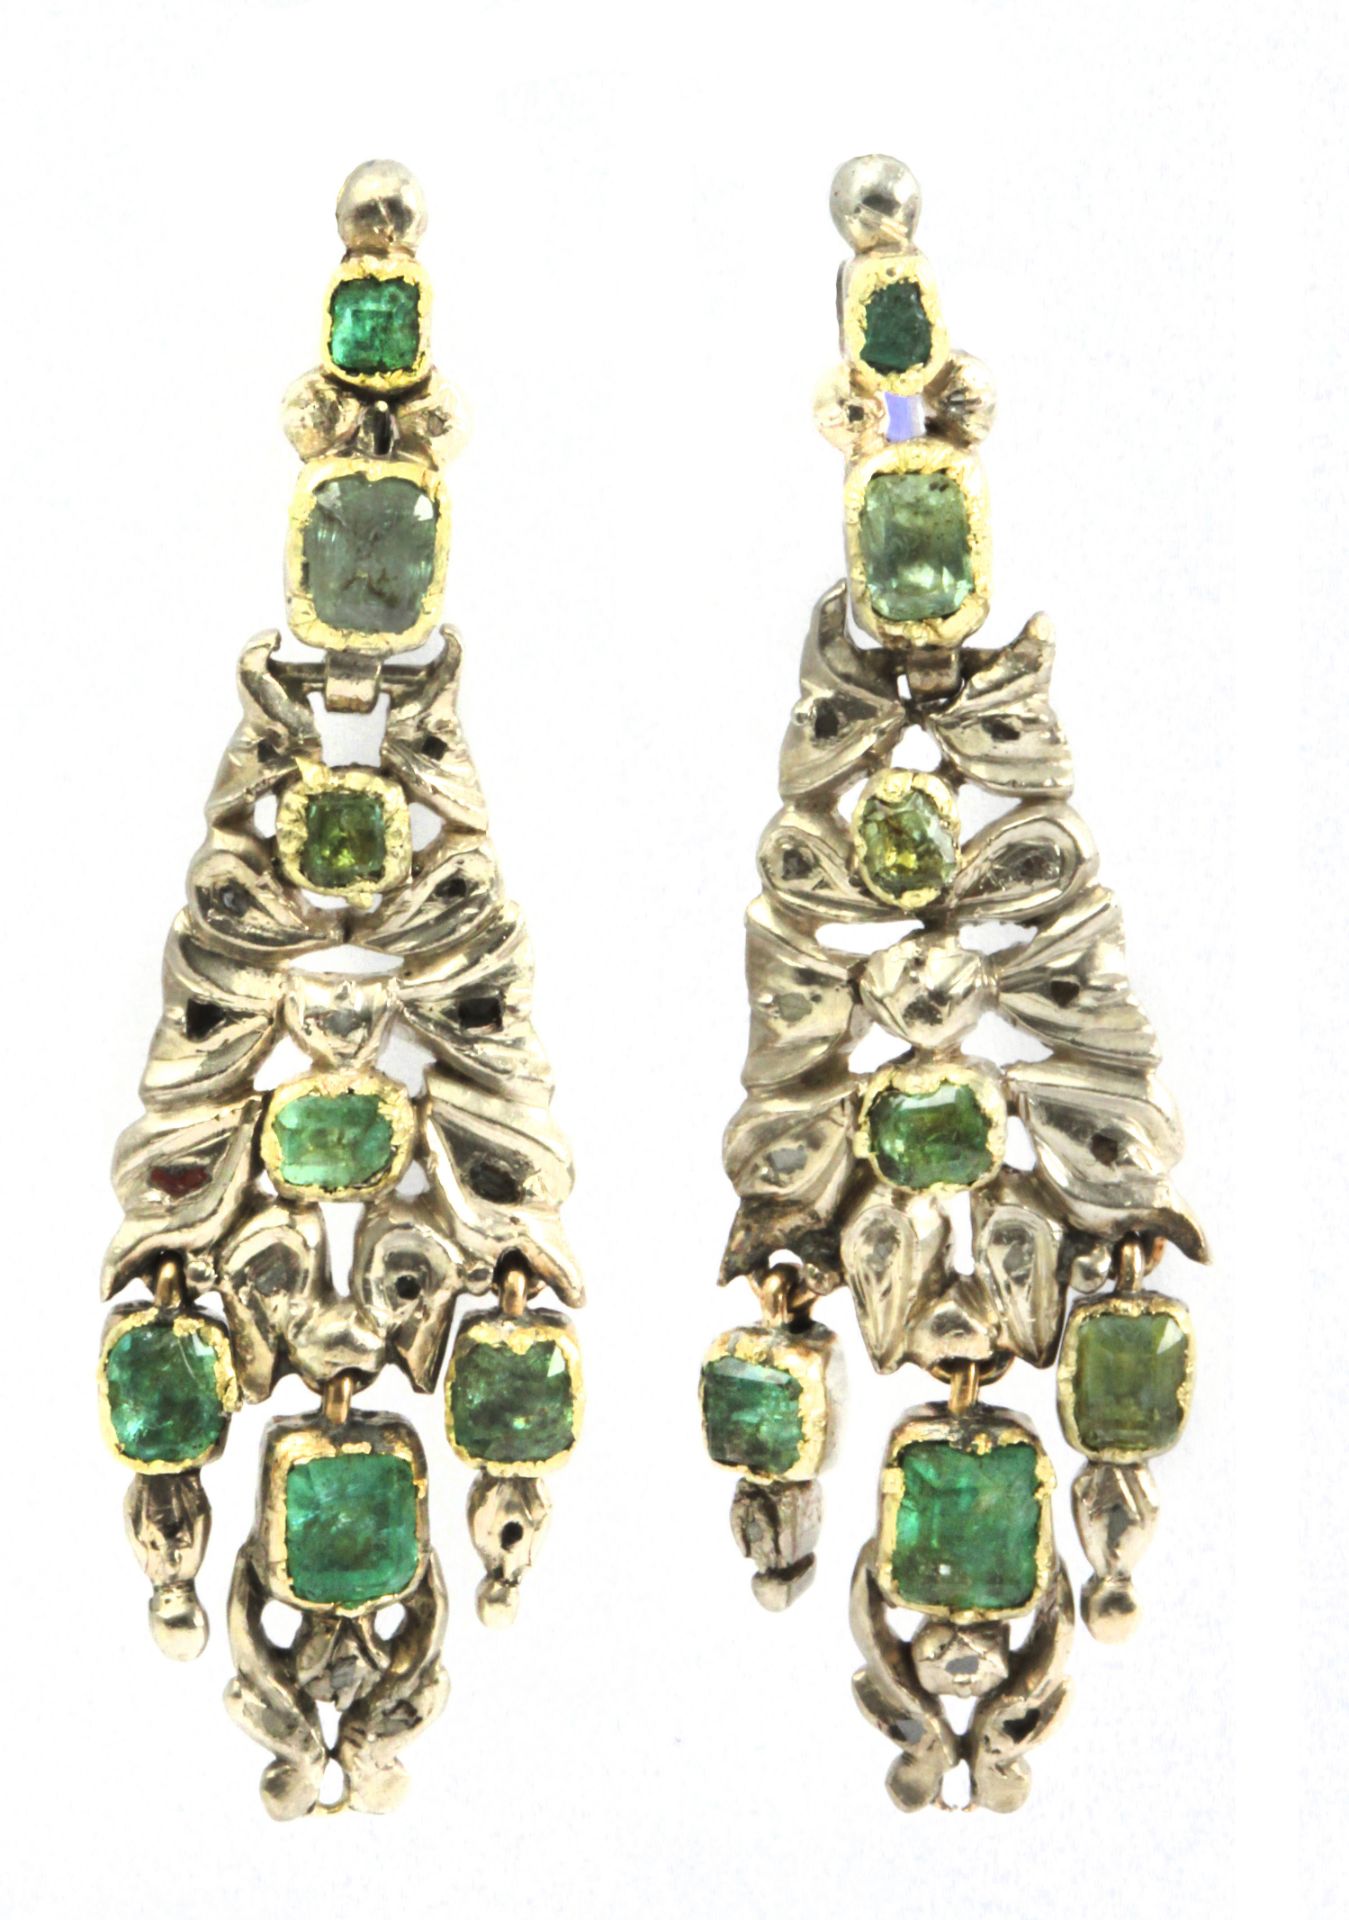 A late 18th century-early 19th century Spanish earrings